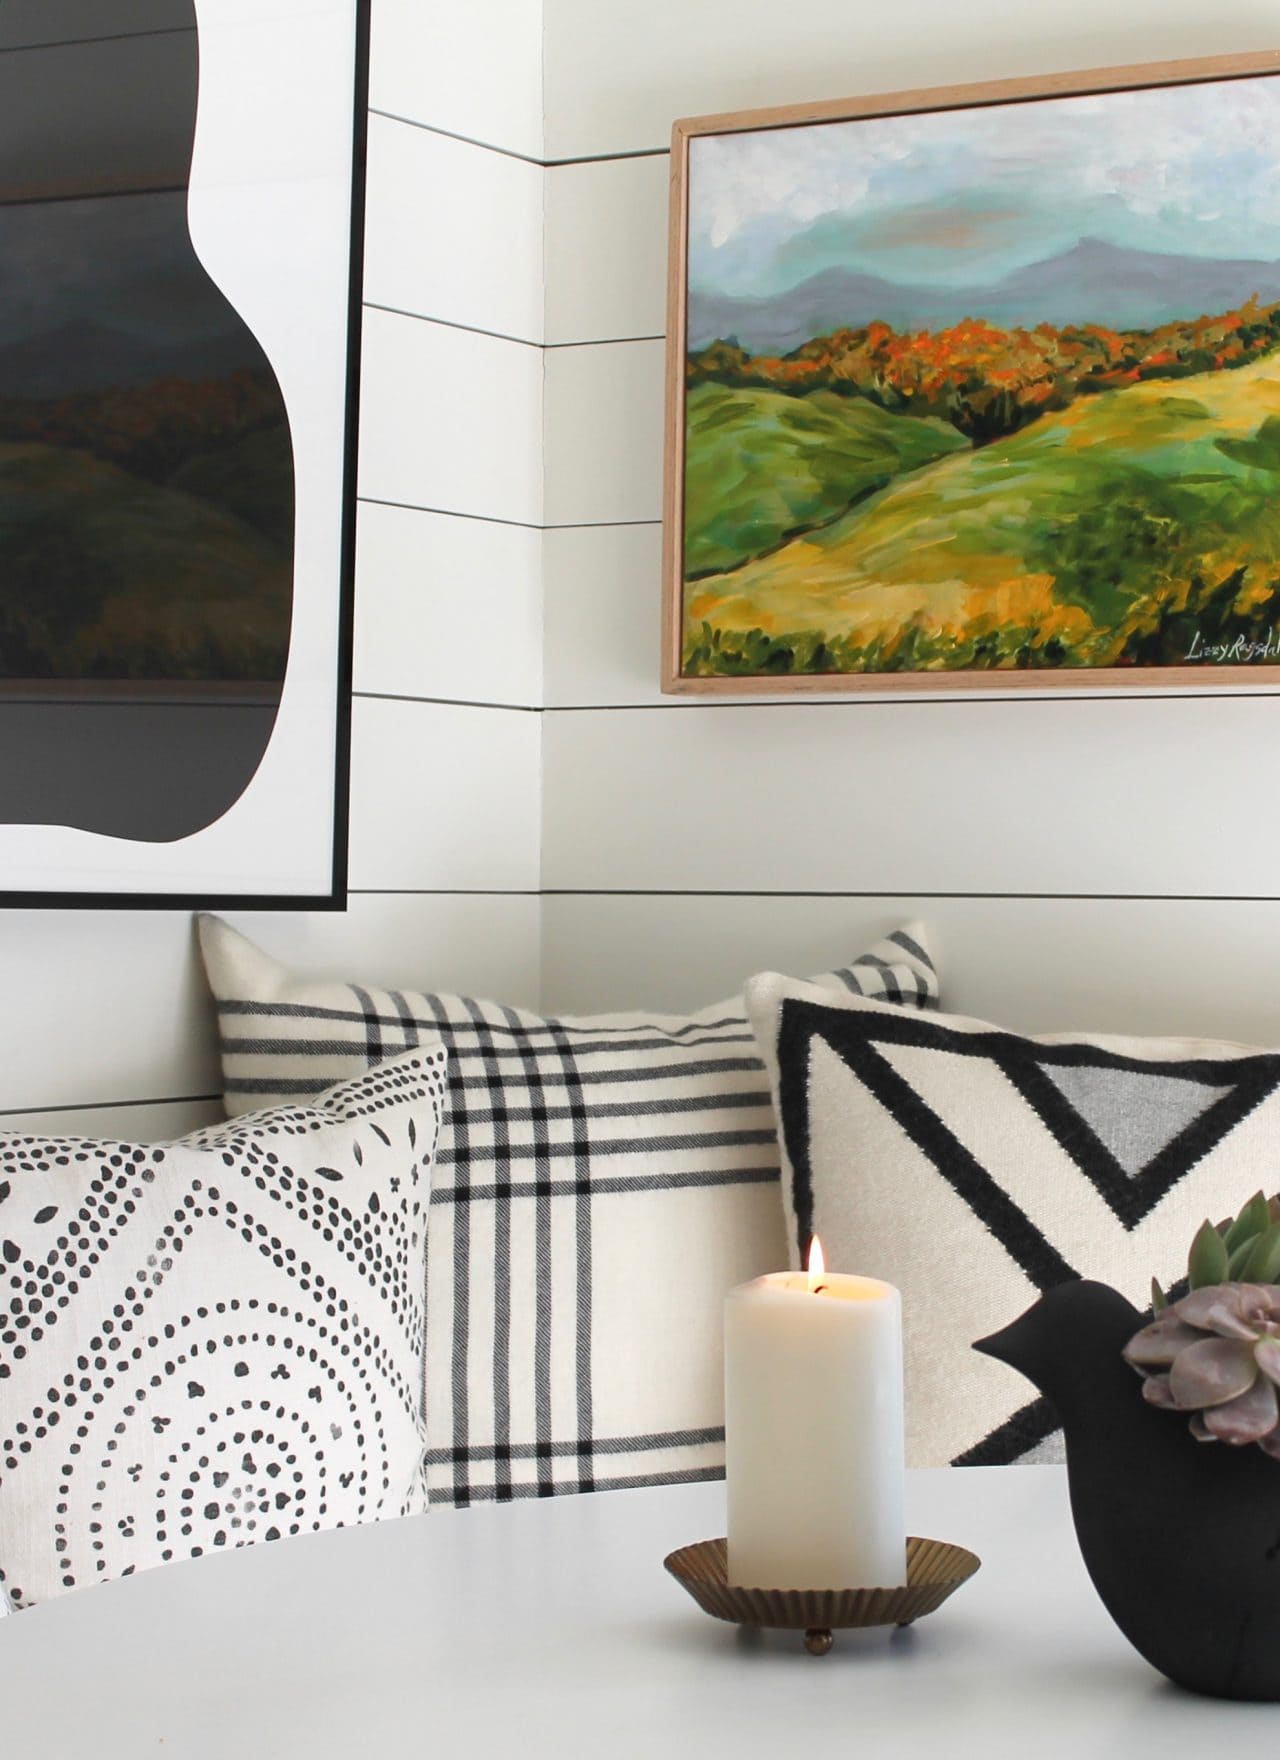 pillows, art, tabletop with planter